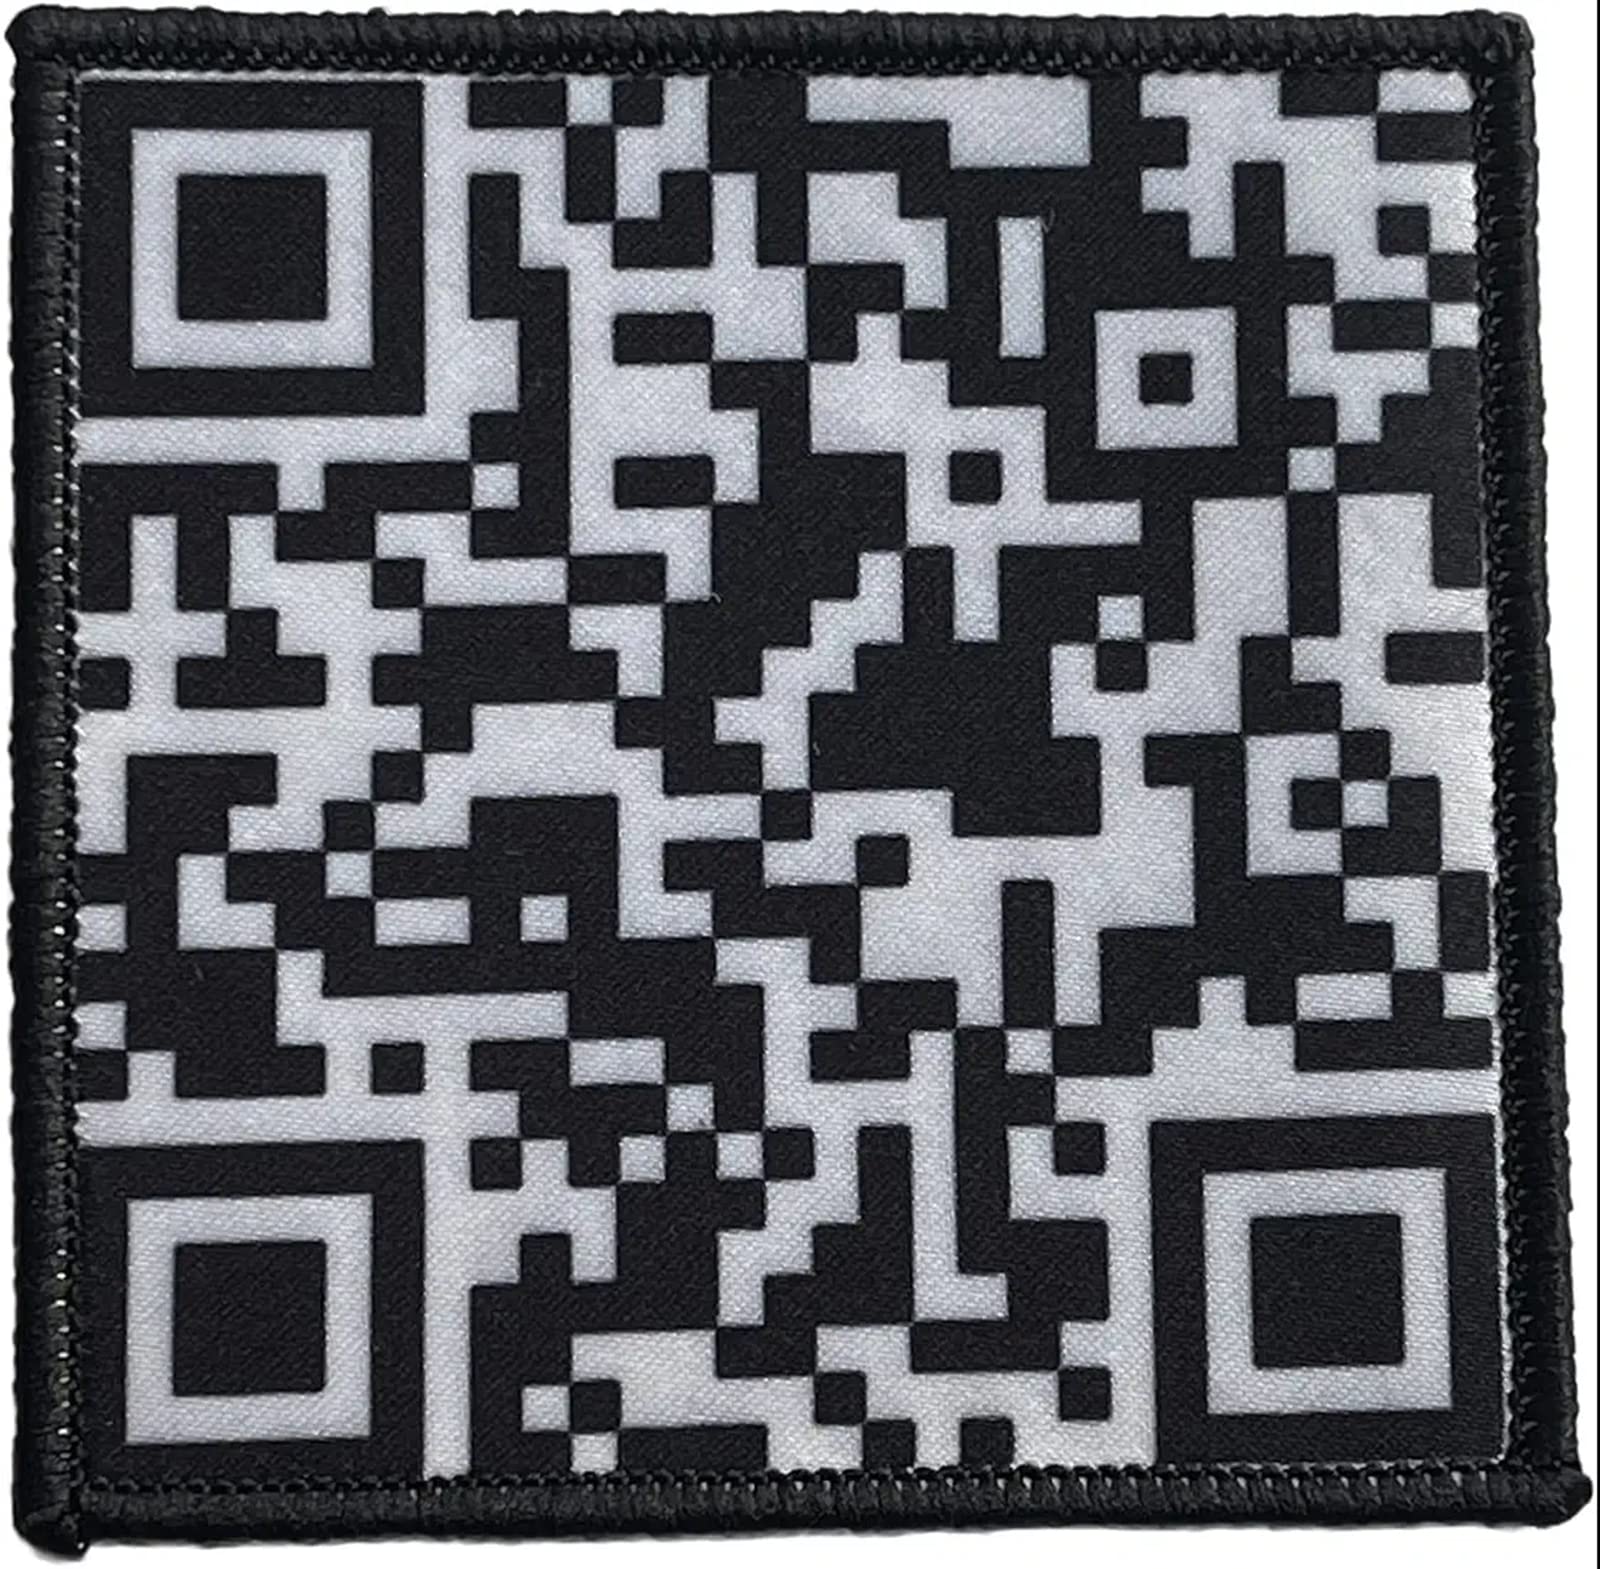 Rick Roll QR Code Funny Morale Patch 2x3 Tactical Military USA